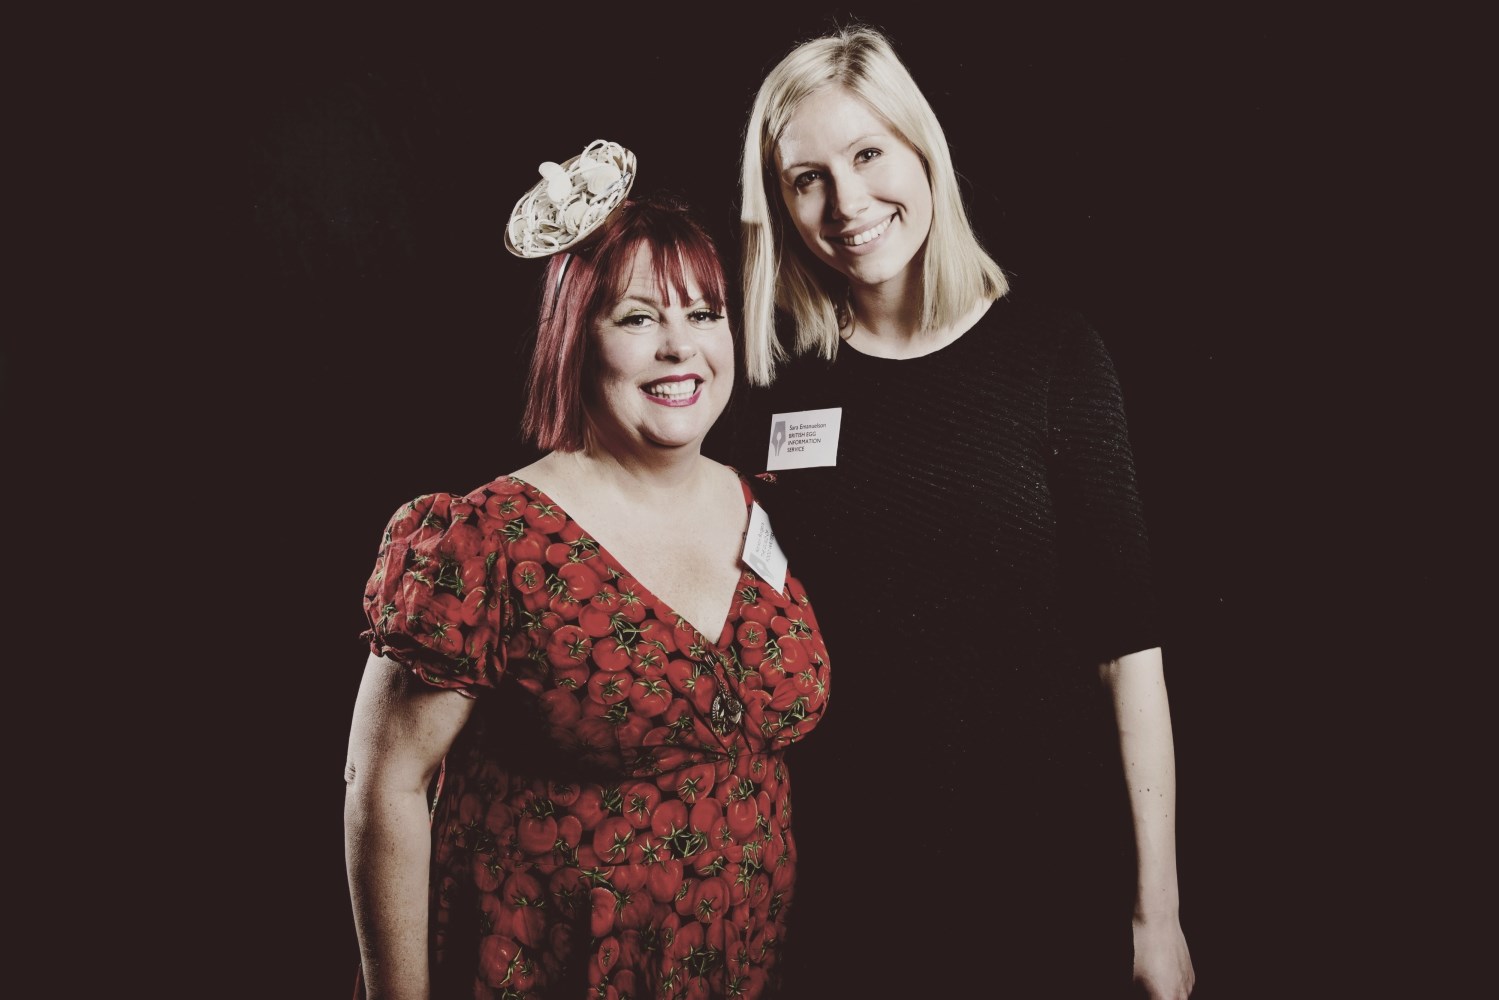 From left to right: Kerstin Rodgers (winner of the Food Blog of the Year Award) and Sara Emanuelson from the British Egg Information Service (sponsors of the Food Blog of the Year Award)